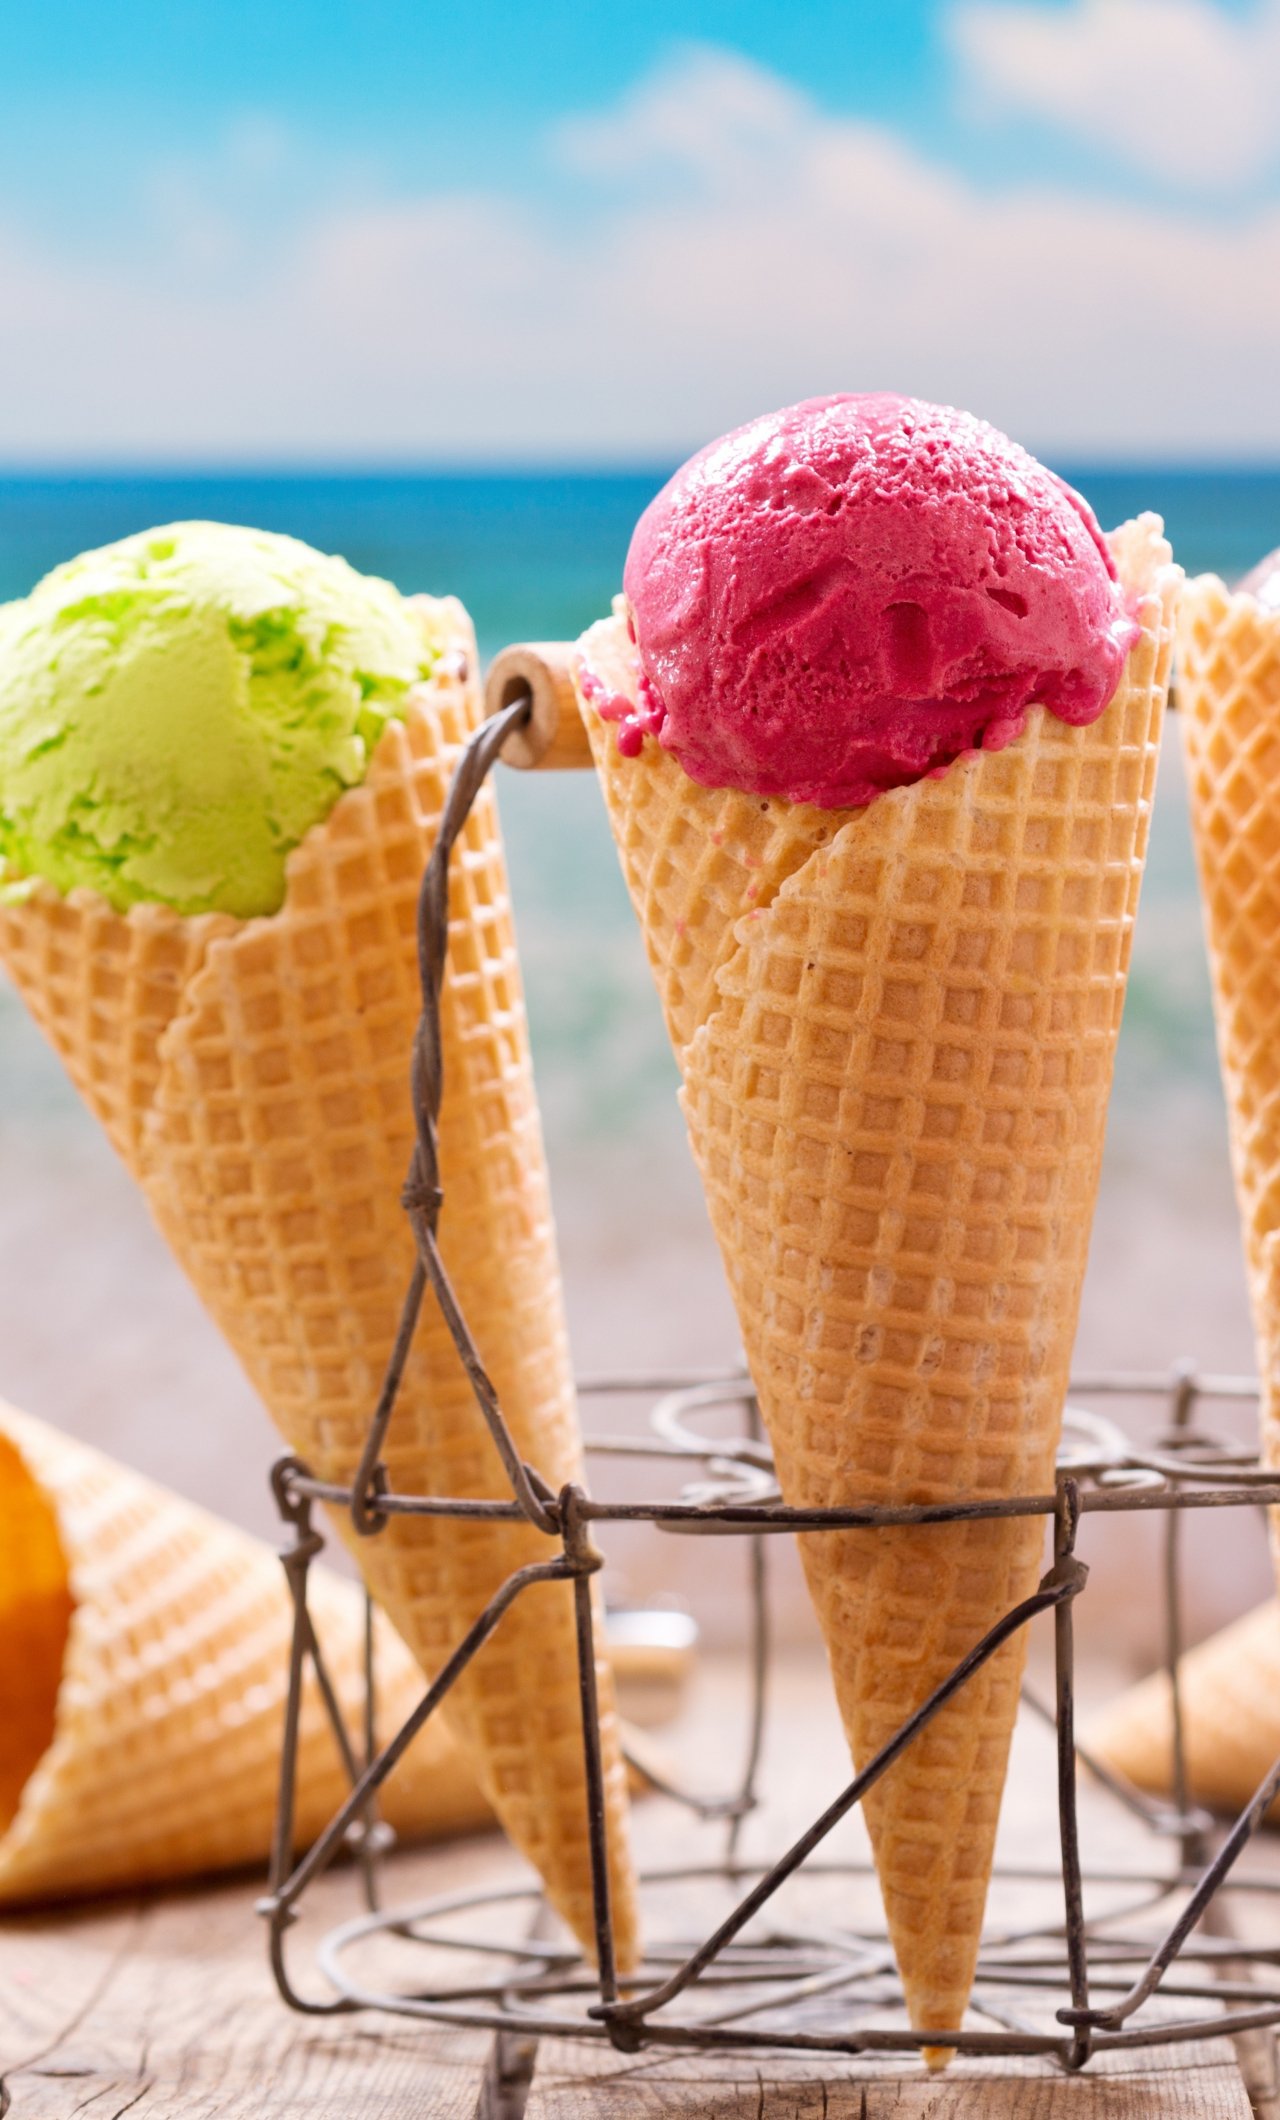 Download ice cream, waffle cones, summer 1280x2120 wallpaper, iphone 6 plus, 1280x2120 HD image, background, 5114